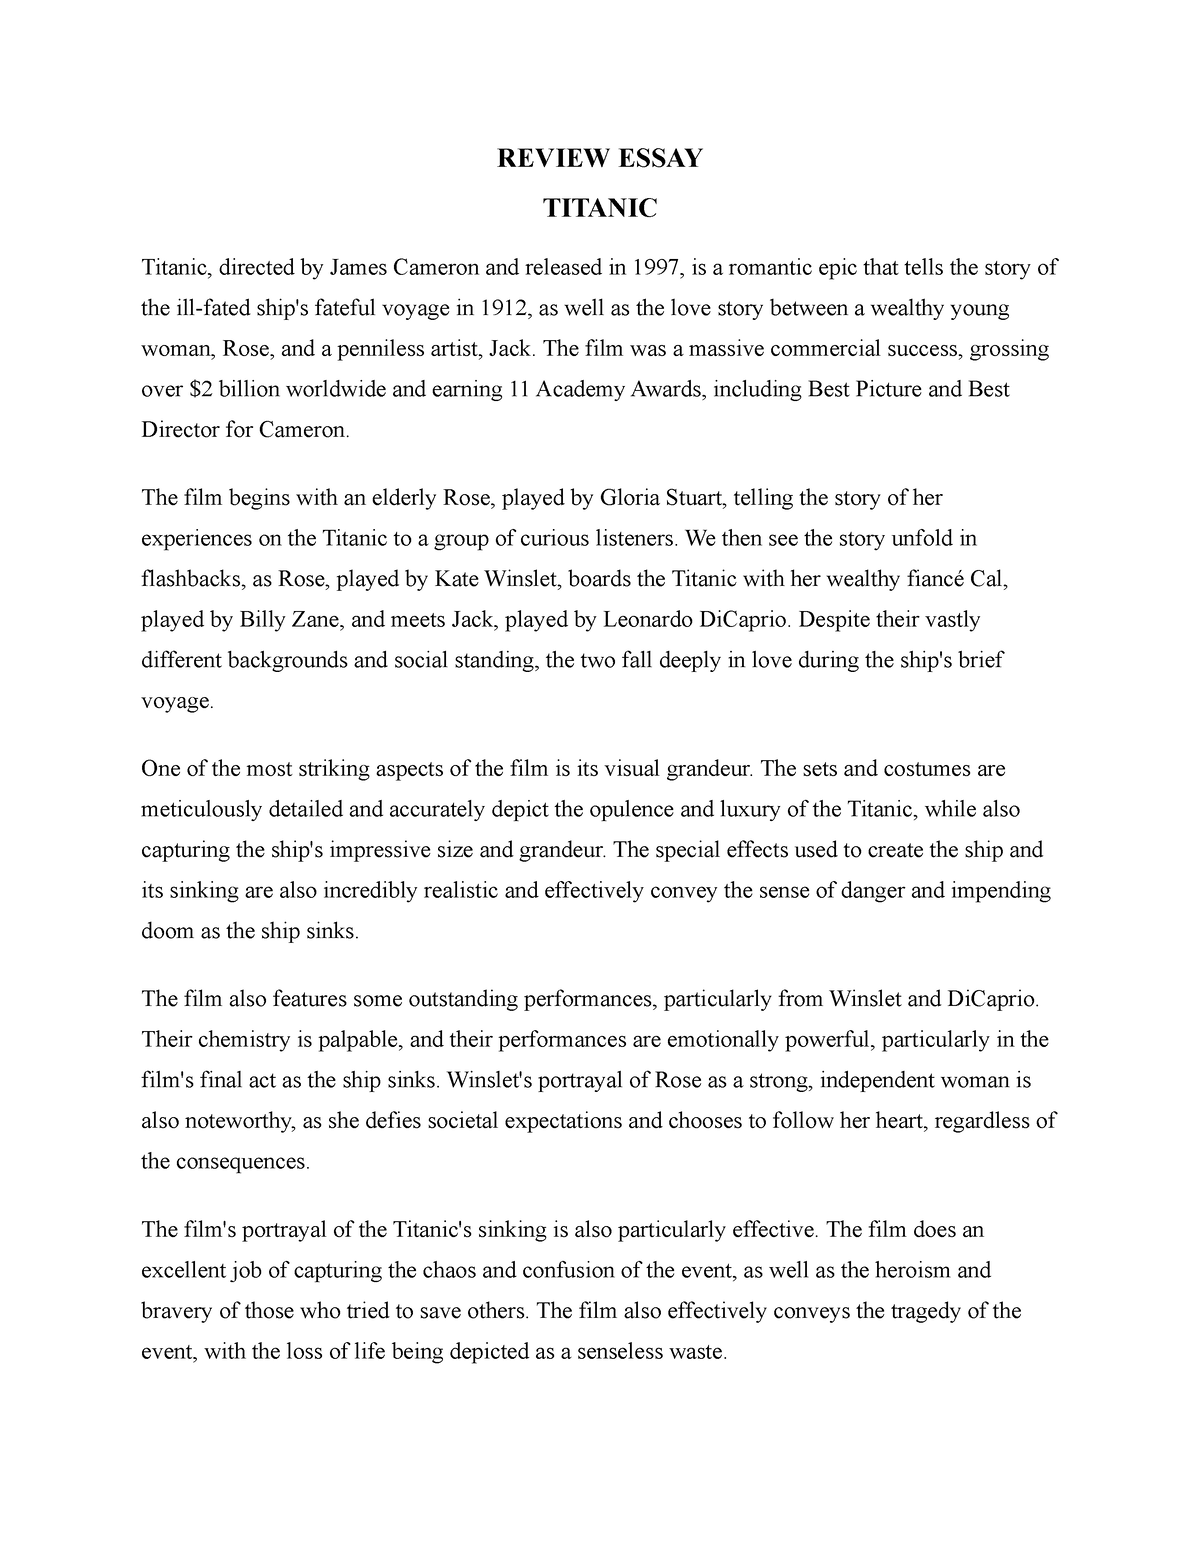 an essay about titanic movie